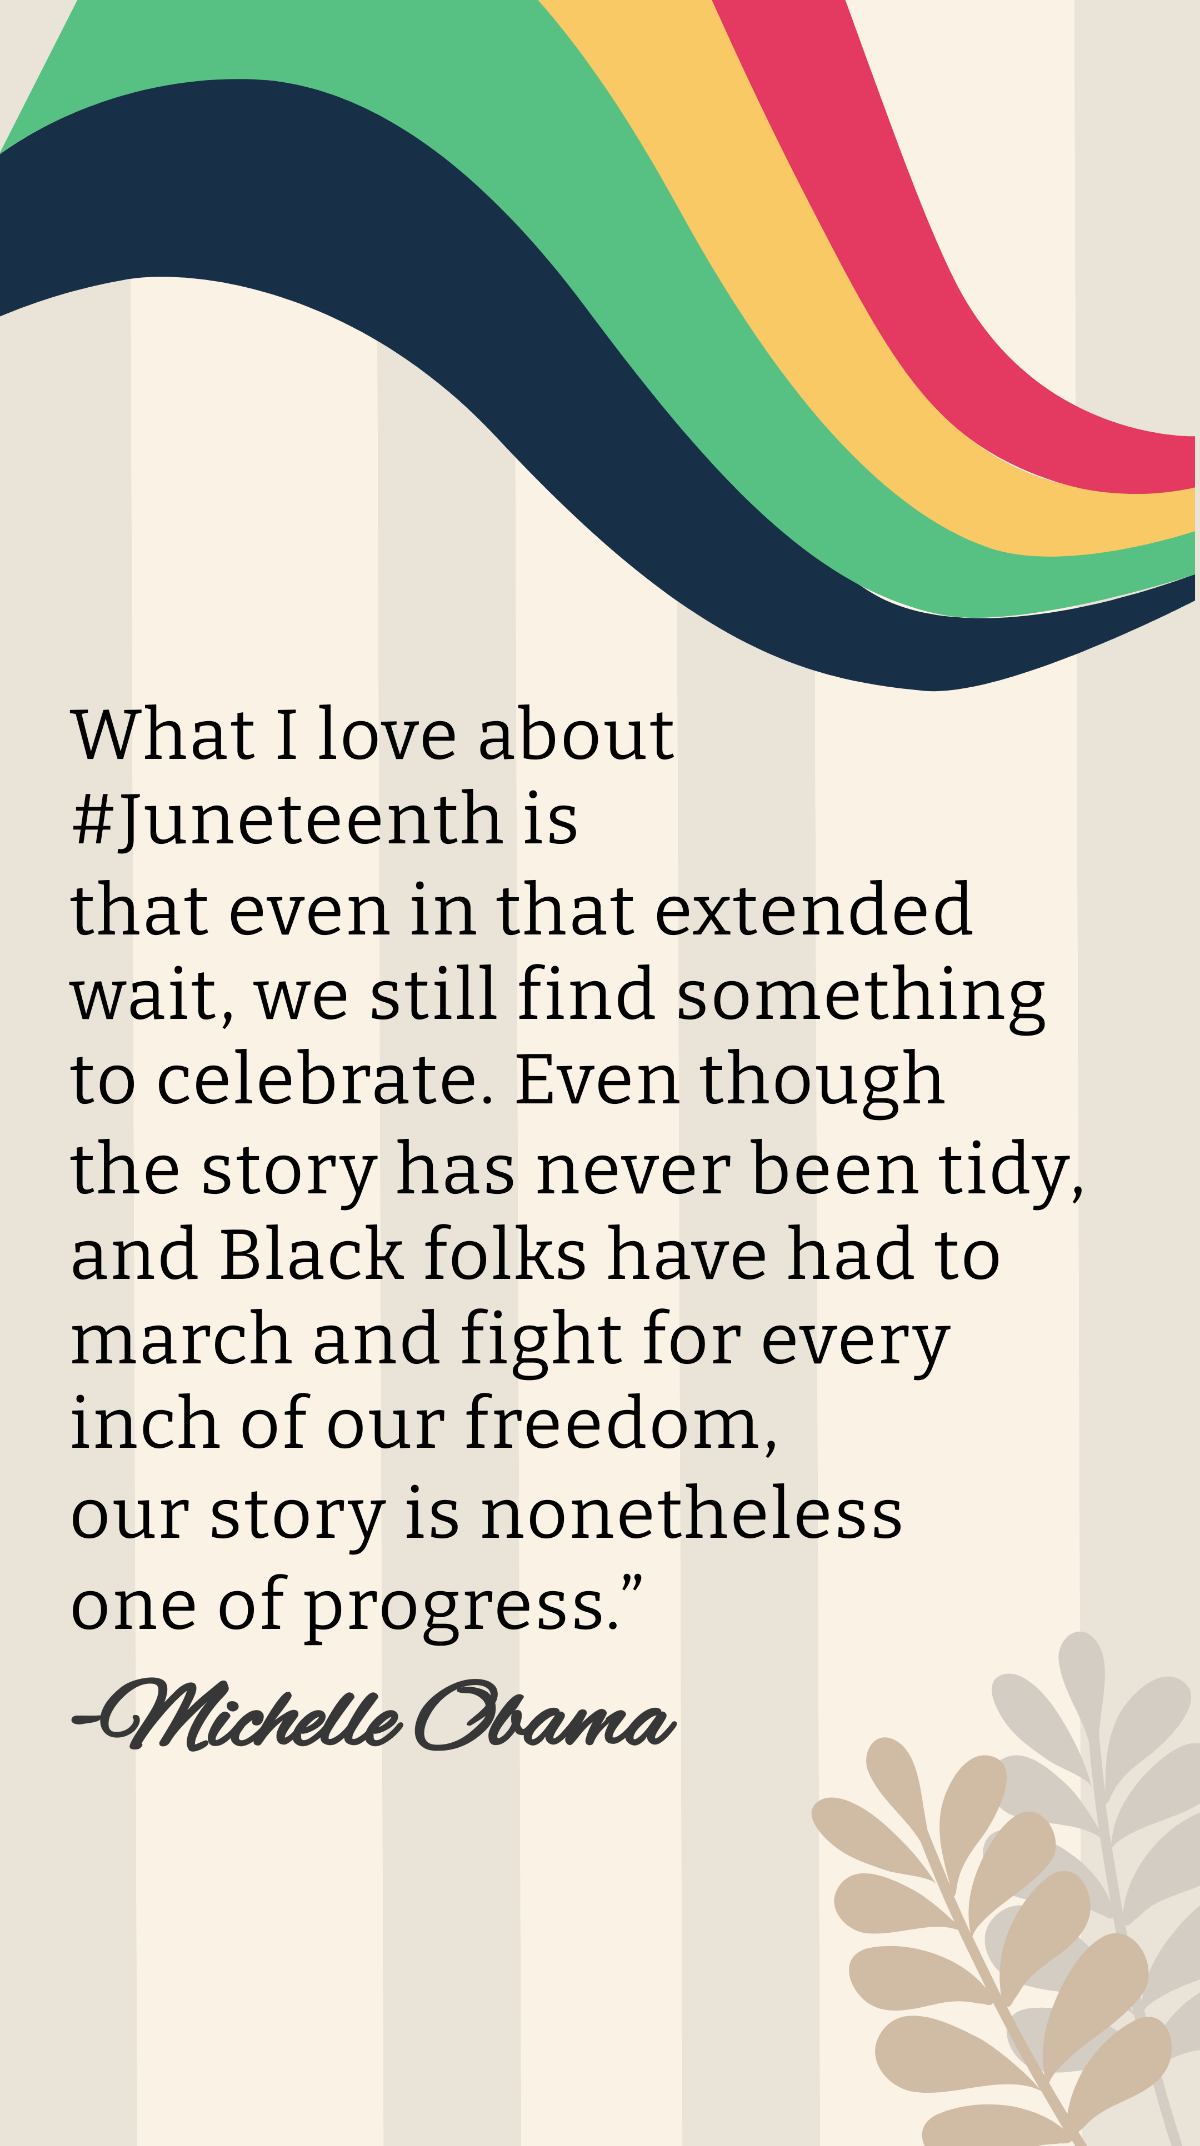 Michelle Obama - What I love about #Juneteenth is that even in that extended wait, we still find something to celebrate. Even though the story has never been tidy, and Black folks have had to march an